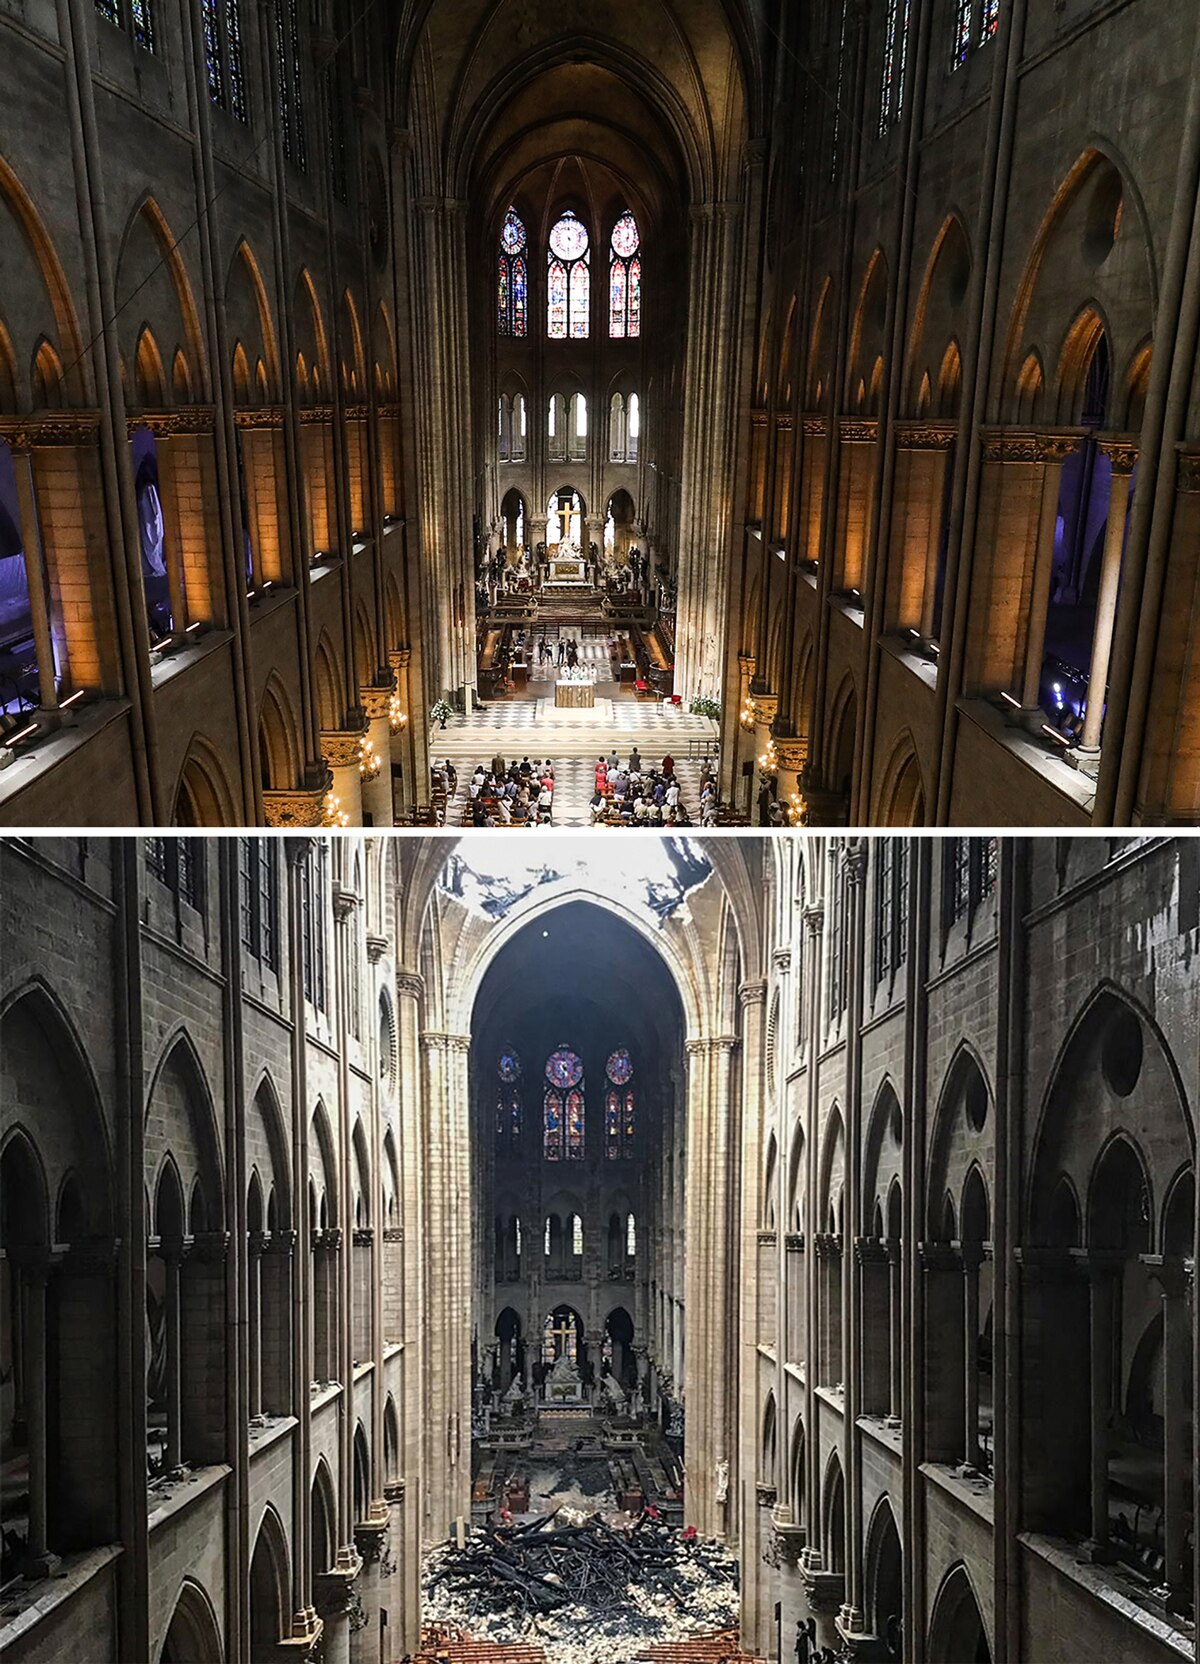 &#39;Like a bombing&#39;: Daylight reveals extent of Notre-Dame damage 1